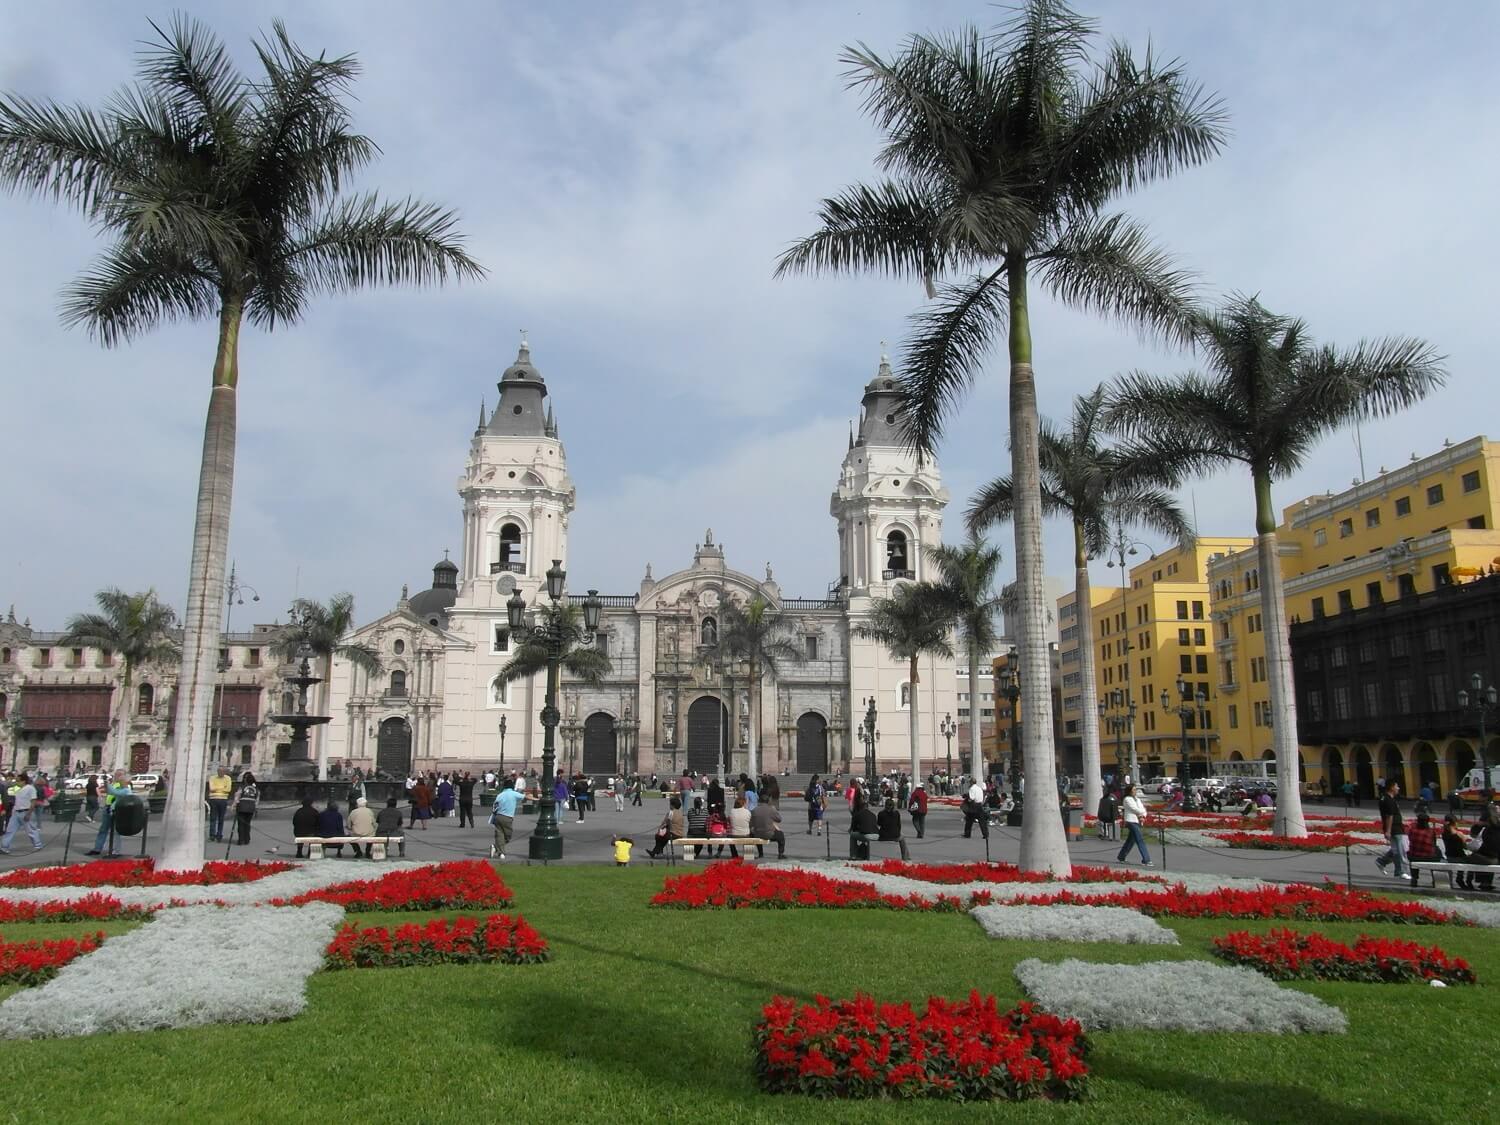 The Plaza de Armas or Plaza Mayor, central square of Lima - RESPONSible Travel Peru